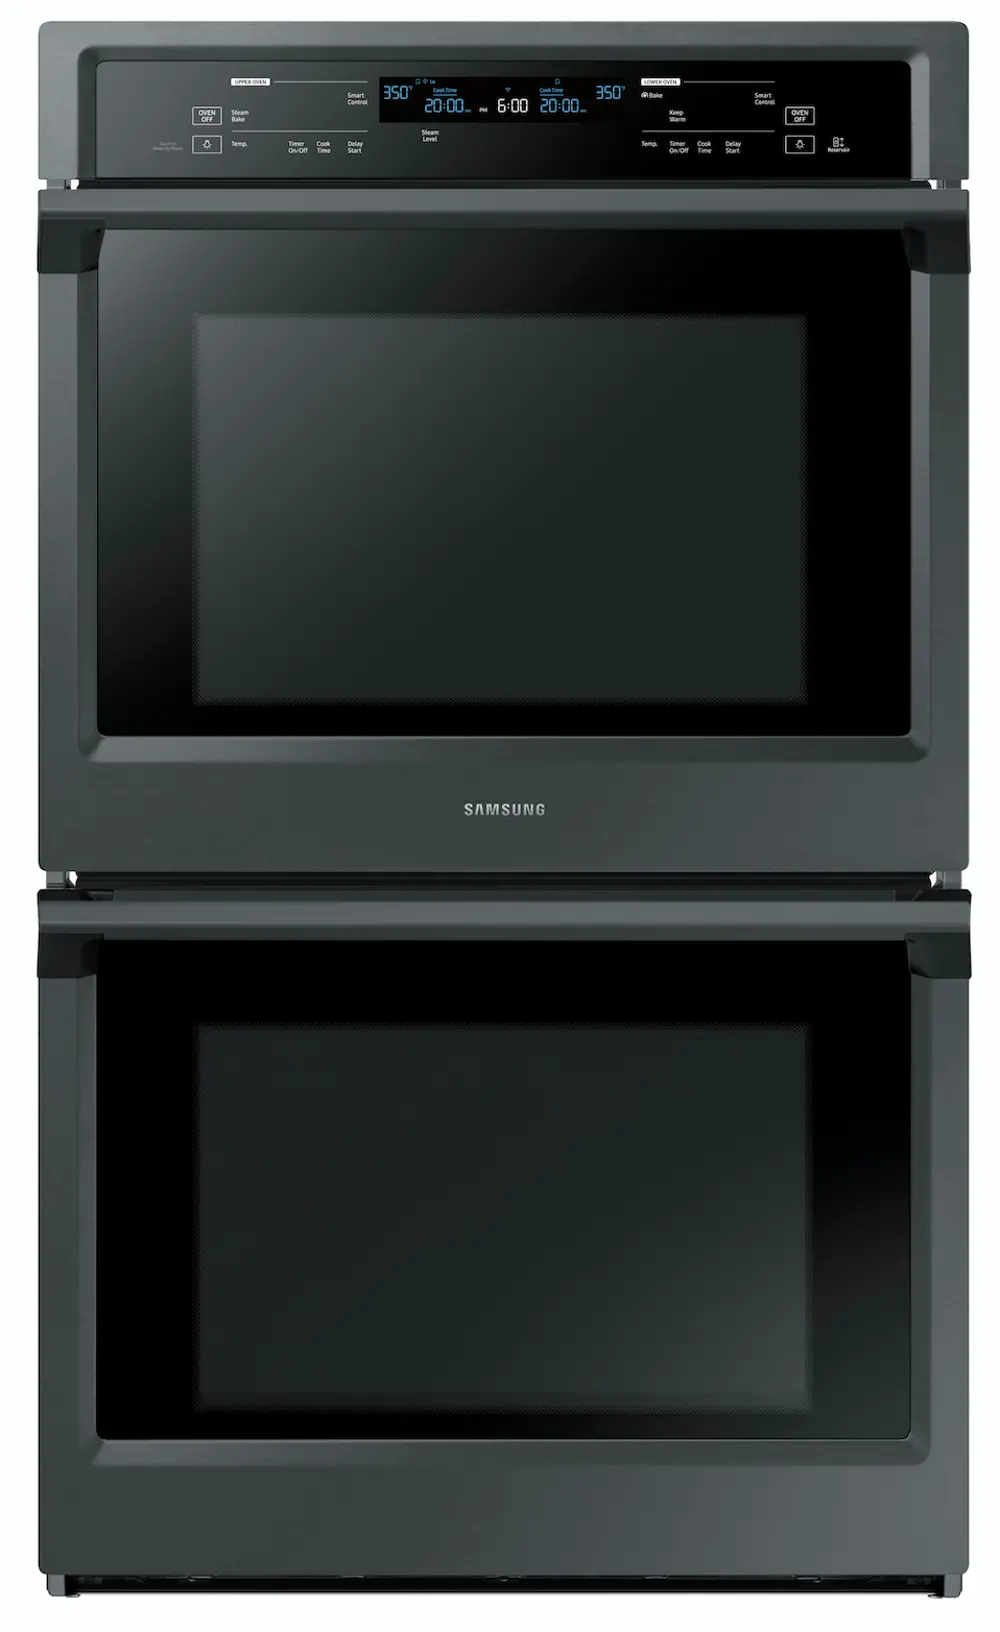 NV51K6650DG Samsung 10.2 cu ft Double Wall Oven - Black Stainless Steel 30 Inch-1